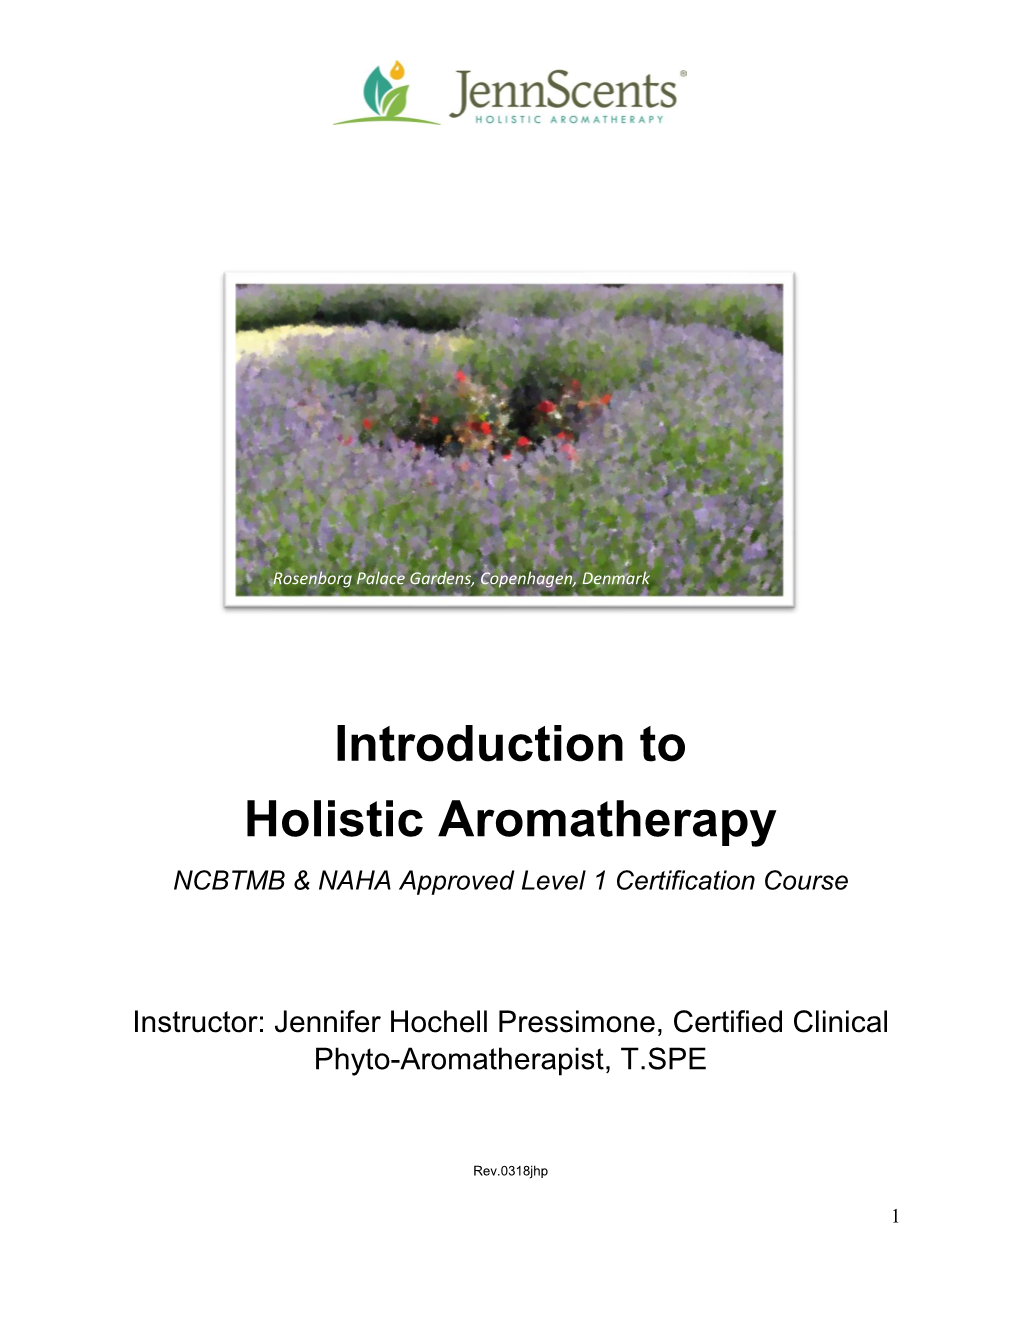 Introduction to Holistic Aromatherapy NCBTMB & NAHA Approved Level 1 Certification Course